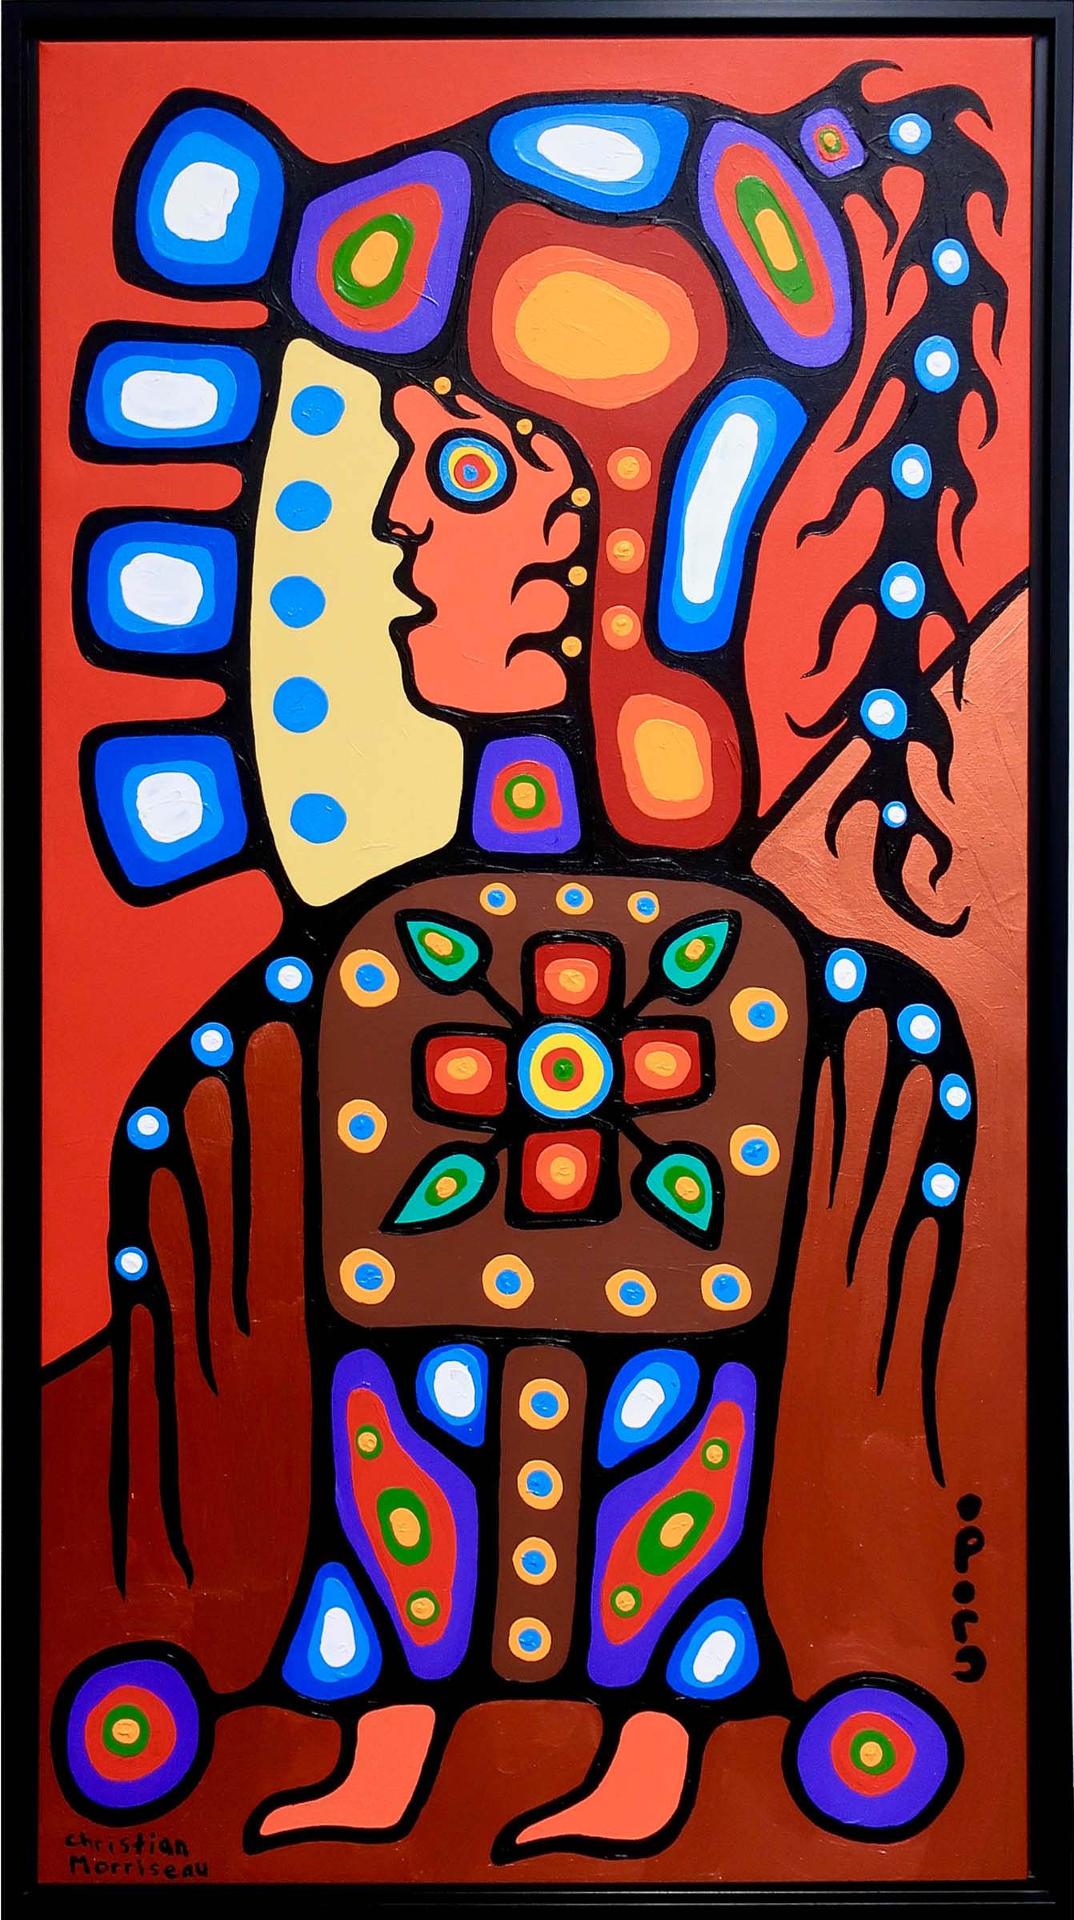 Christian Morrisseau (1969) - Grandfather's Blessing